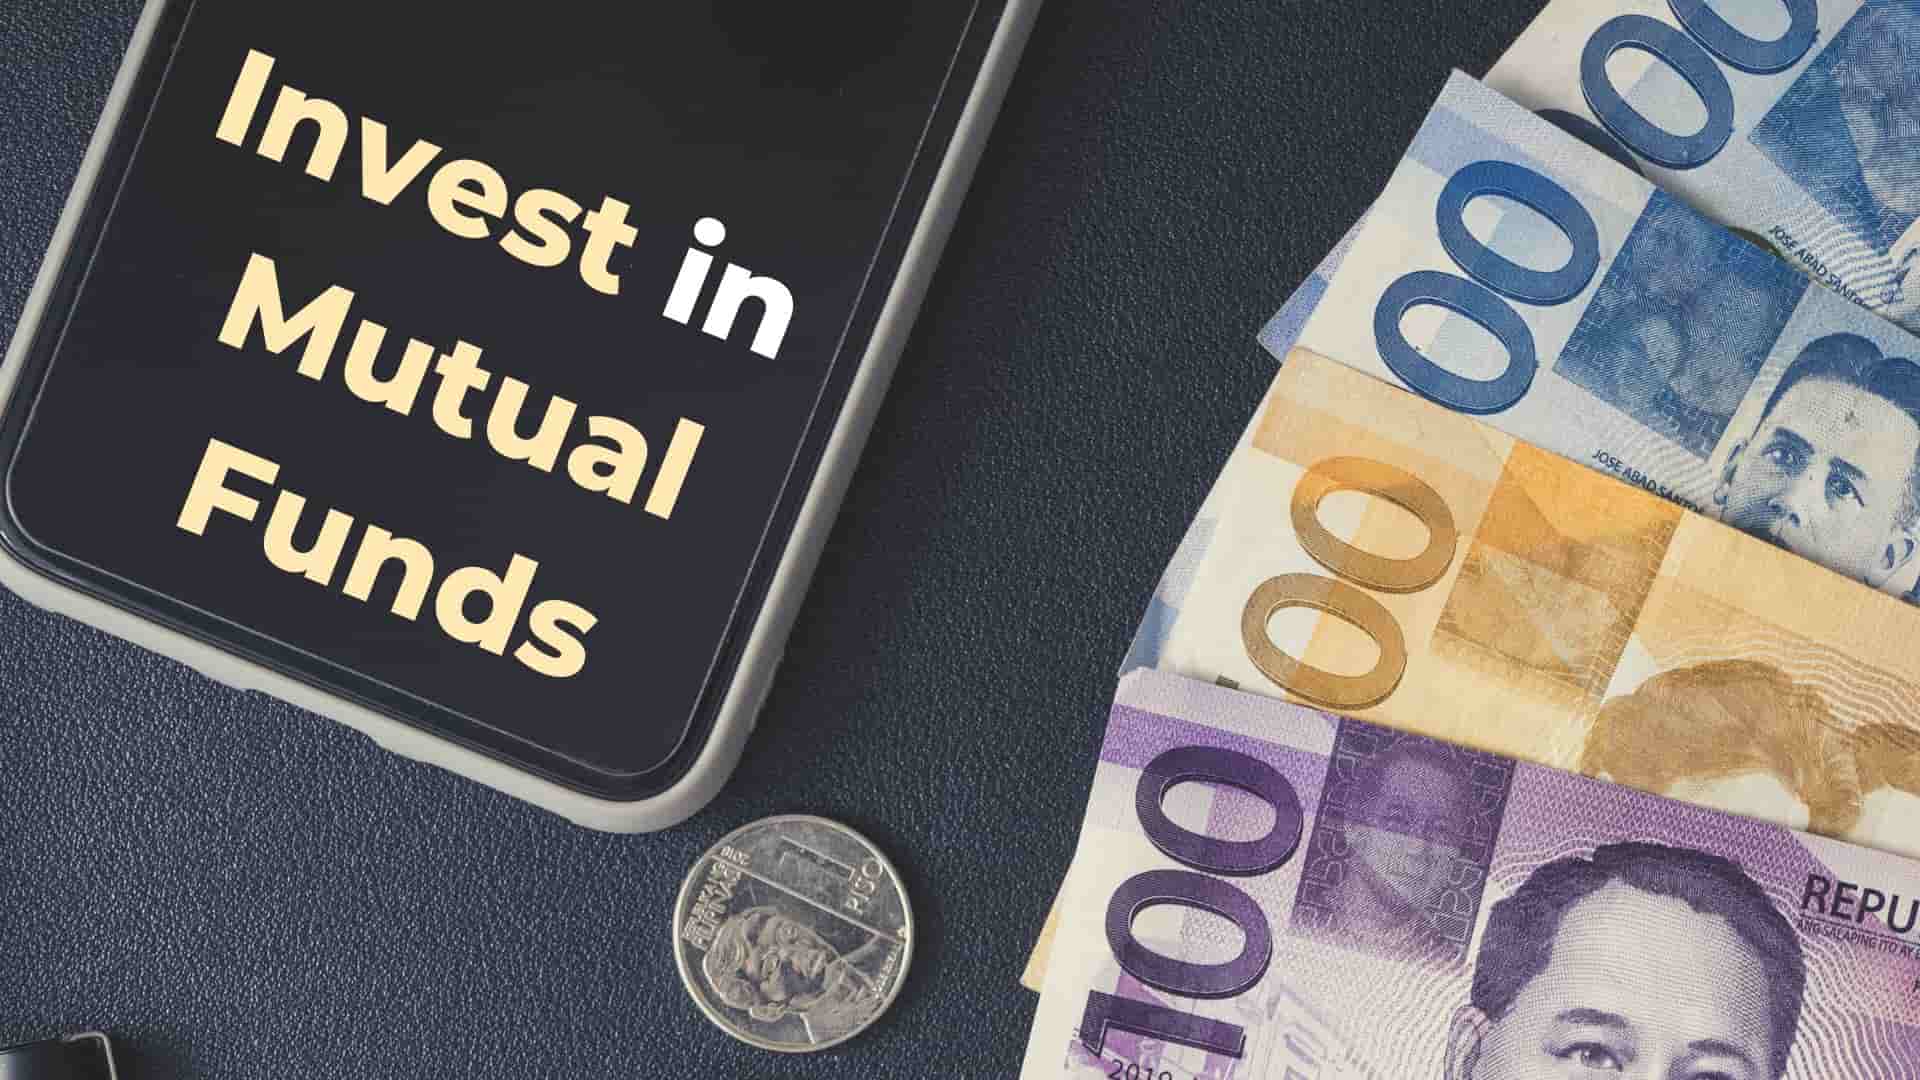 Peso bills and phone with Invest in Mutual Funds written on the phone